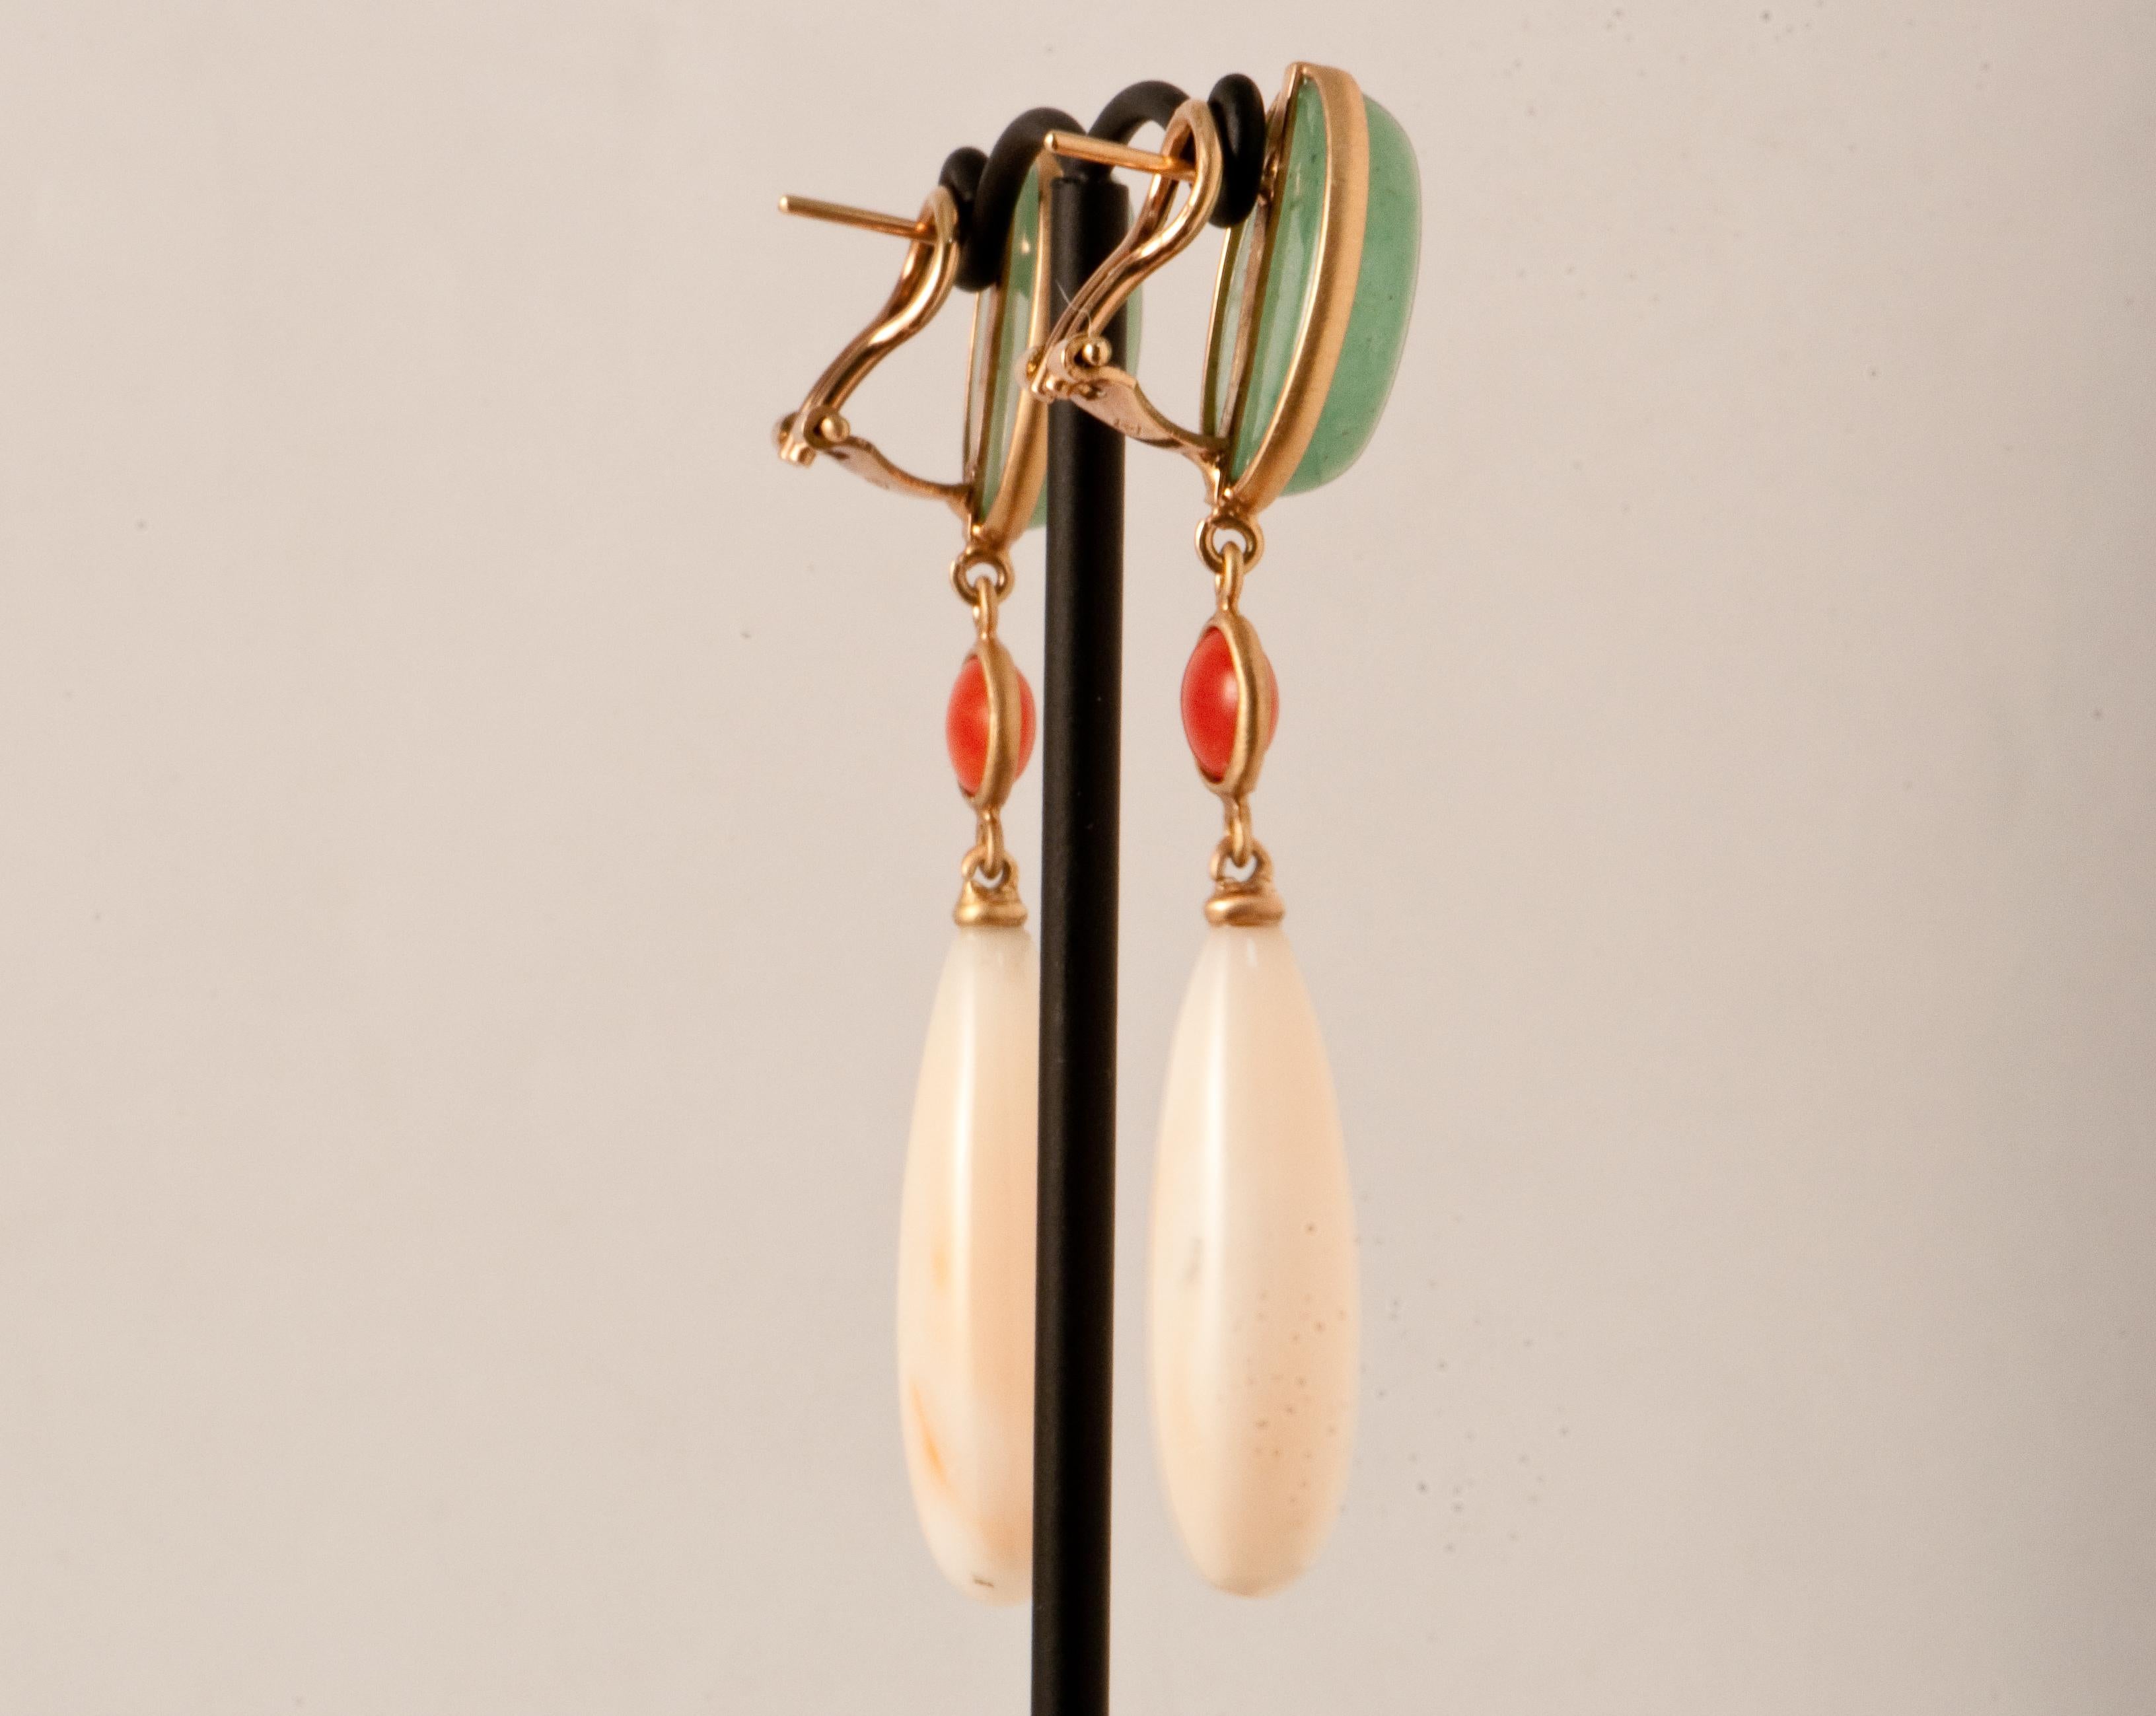 Discover This aventurine and coral on Gold Chandelier Earrings.
Aventurine
Coral
Angel Skin Coral
Pink Gold 18 Carat